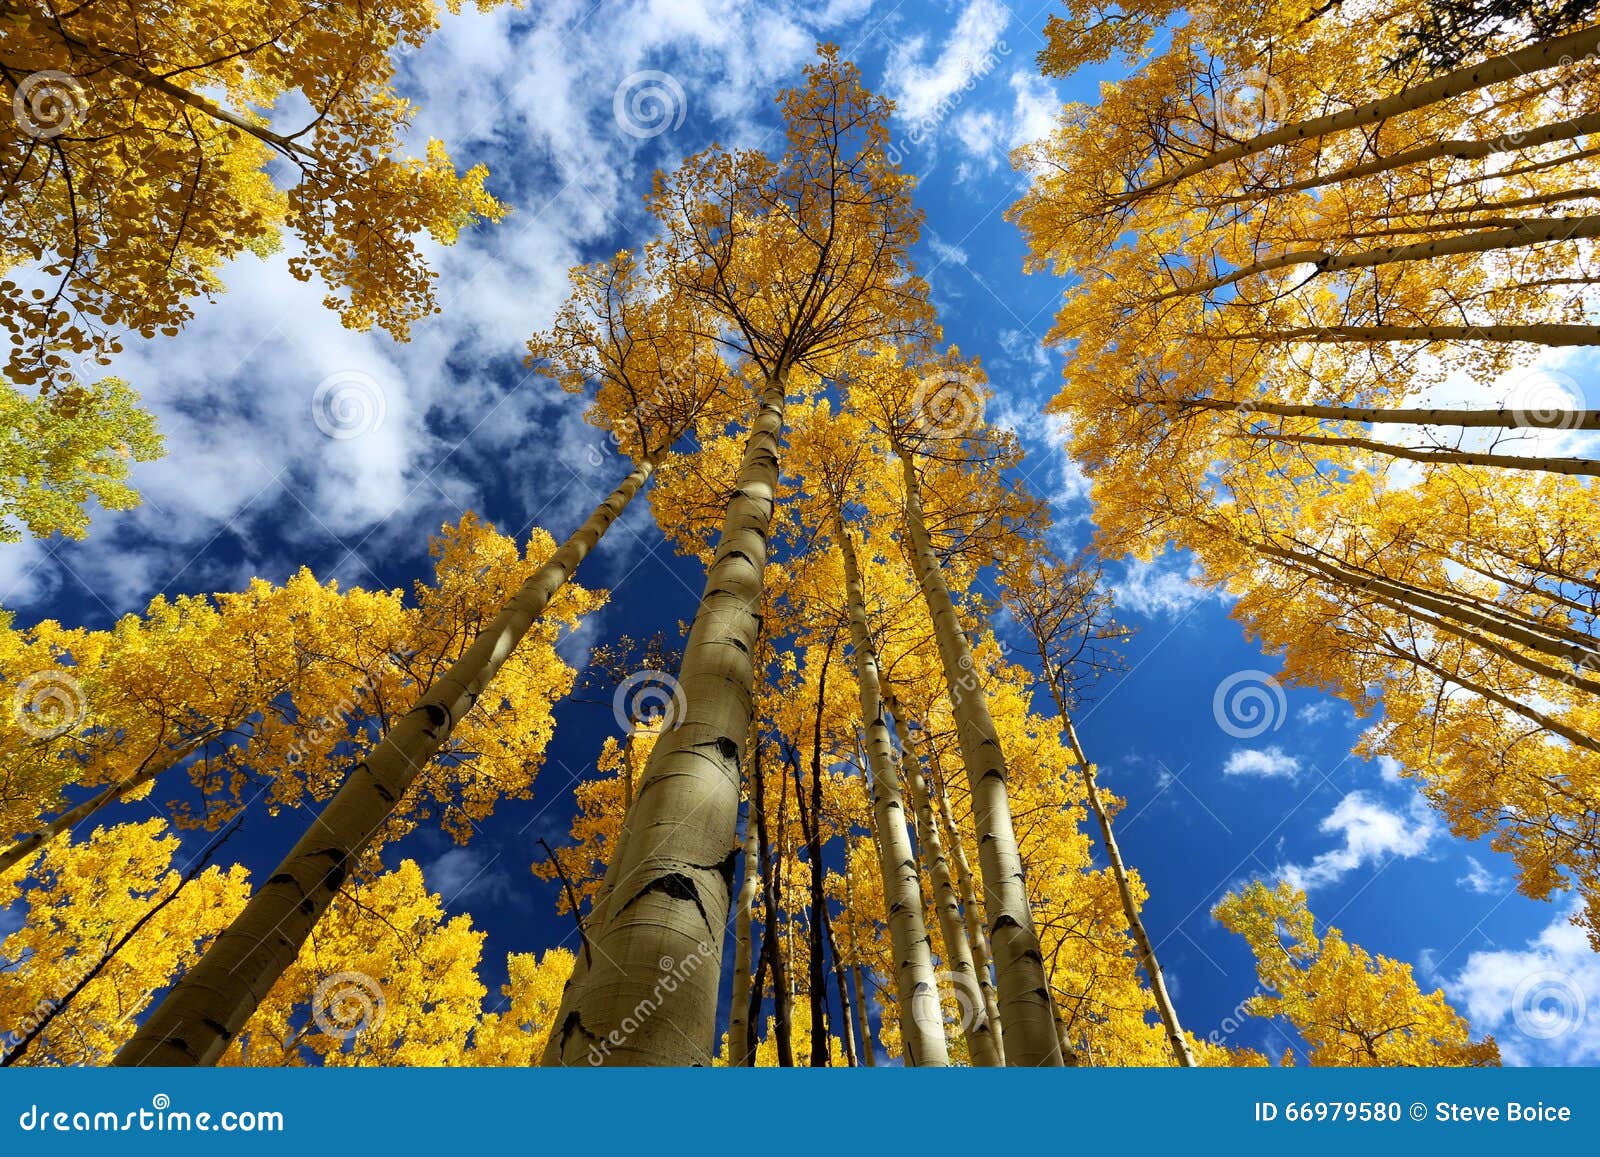 autumn canopy of brilliant yellow aspen tree leafs in fall in the rocky mountains of colorado